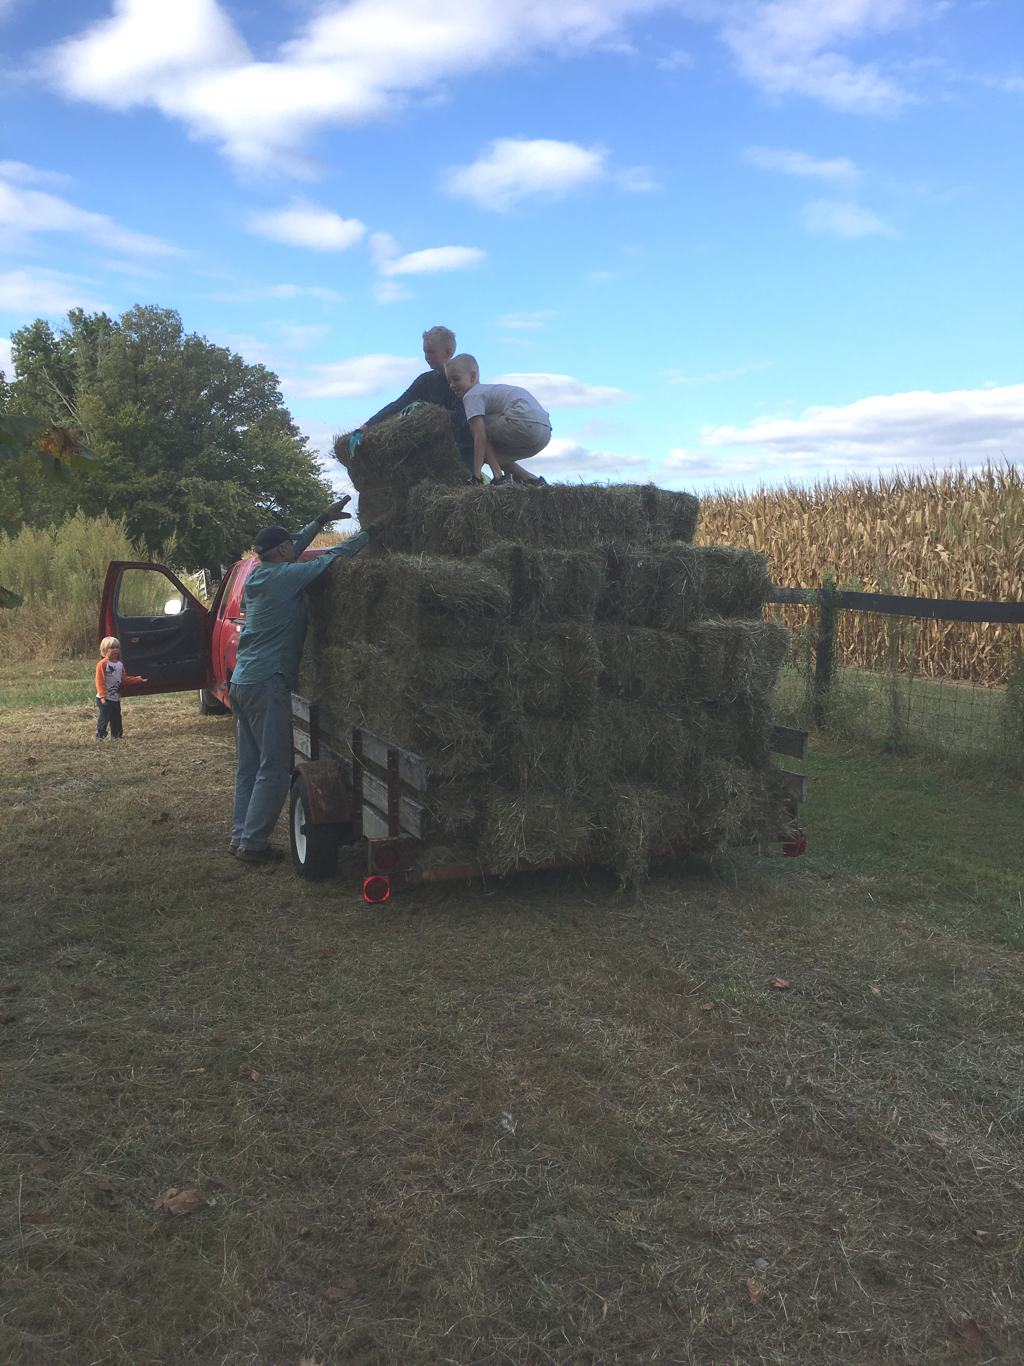 Bucking hay bales to the top of the wagon.